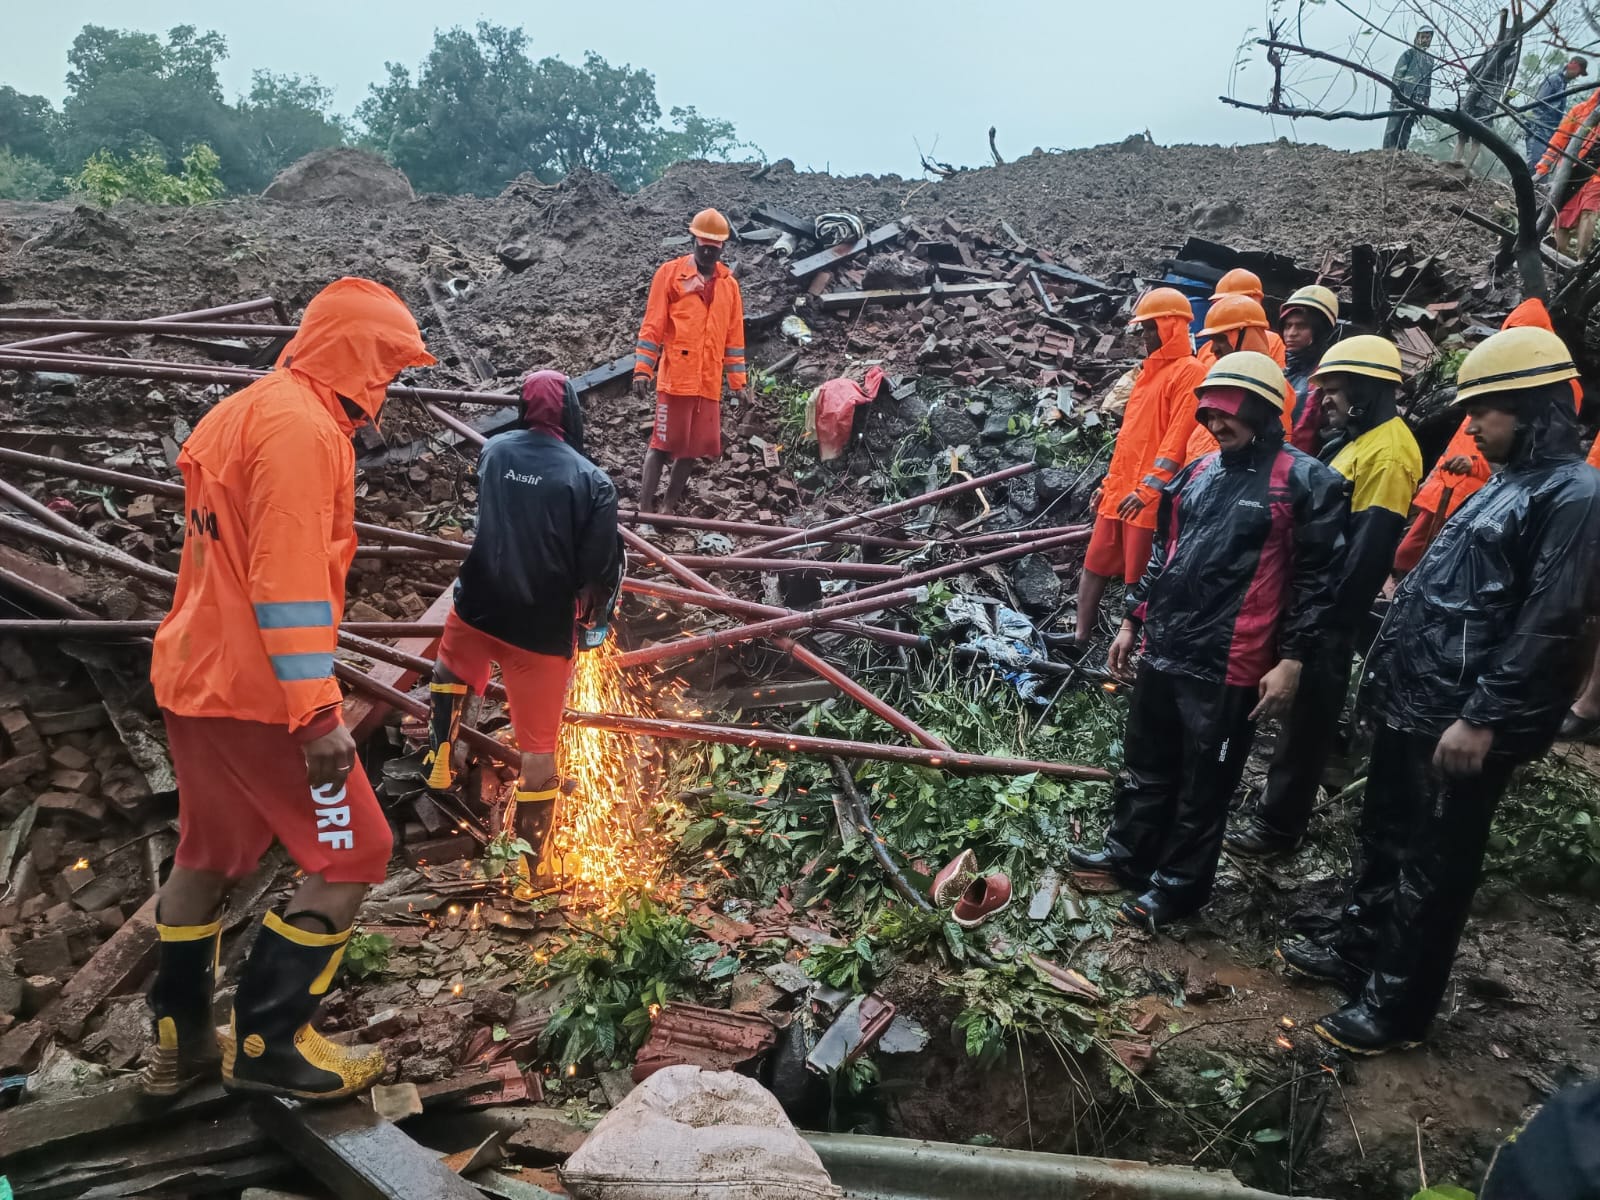 While 75 persons have been rescued, many are still feared trapped, the official said. Four NDRF teams are engaged in rescue work